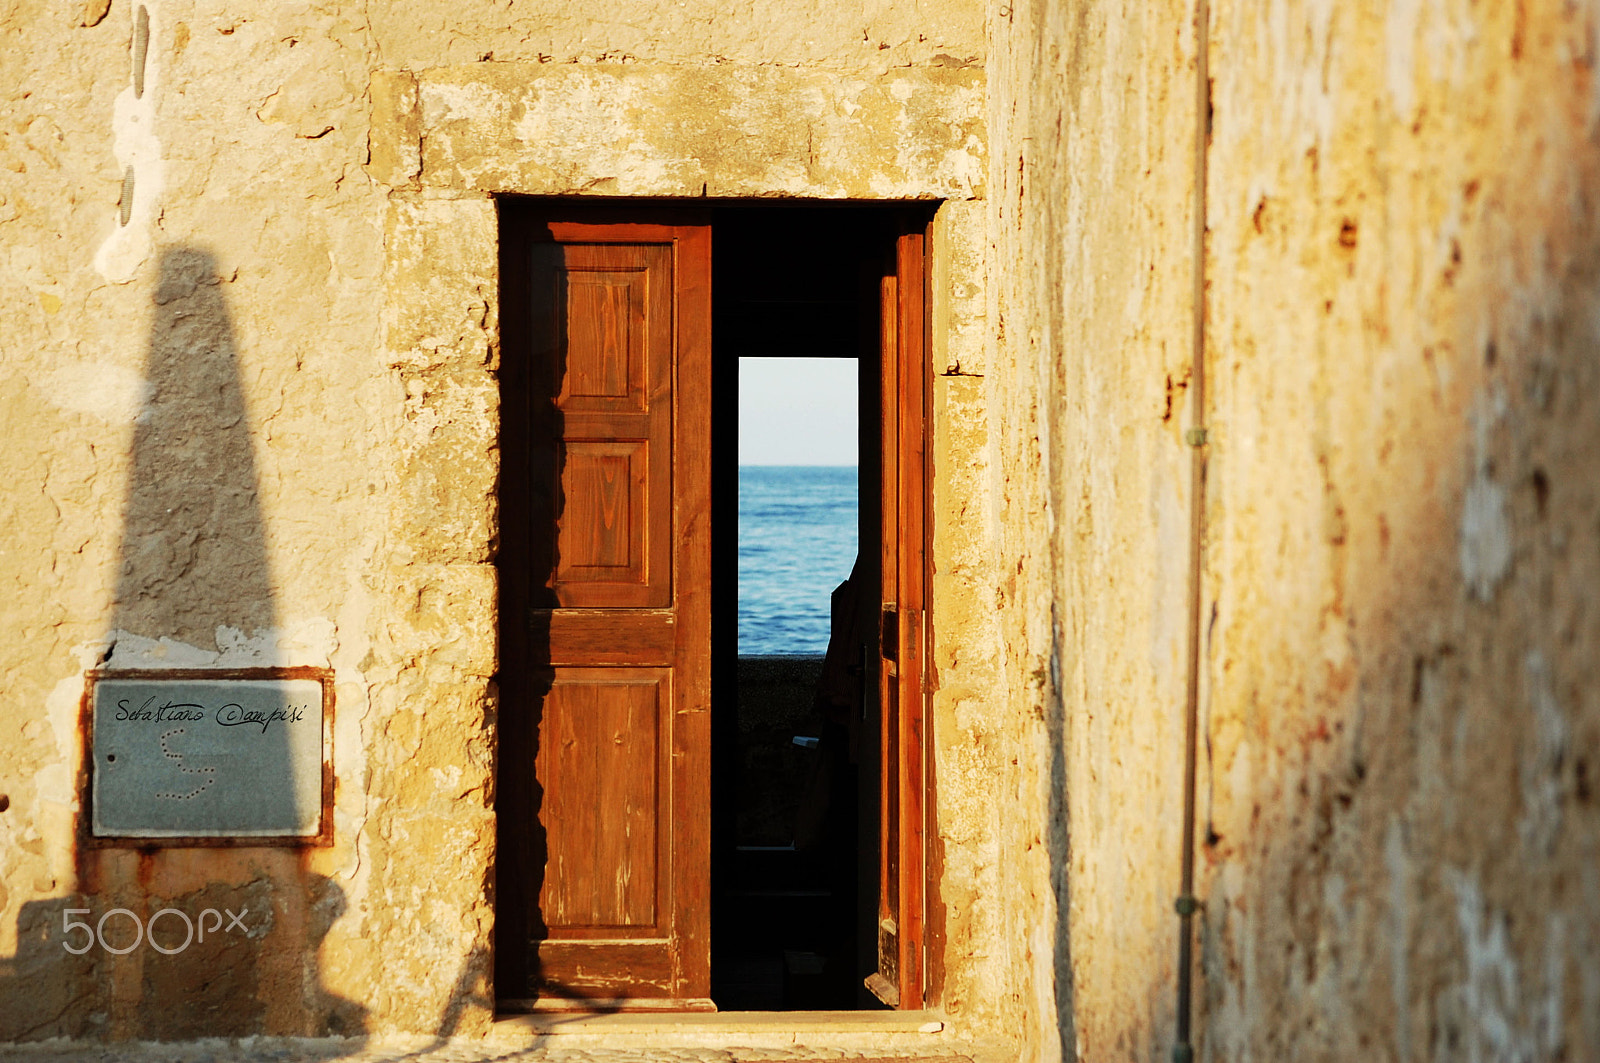 Nikon D40 sample photo. Sicily, all the doors leading to the ocean photography